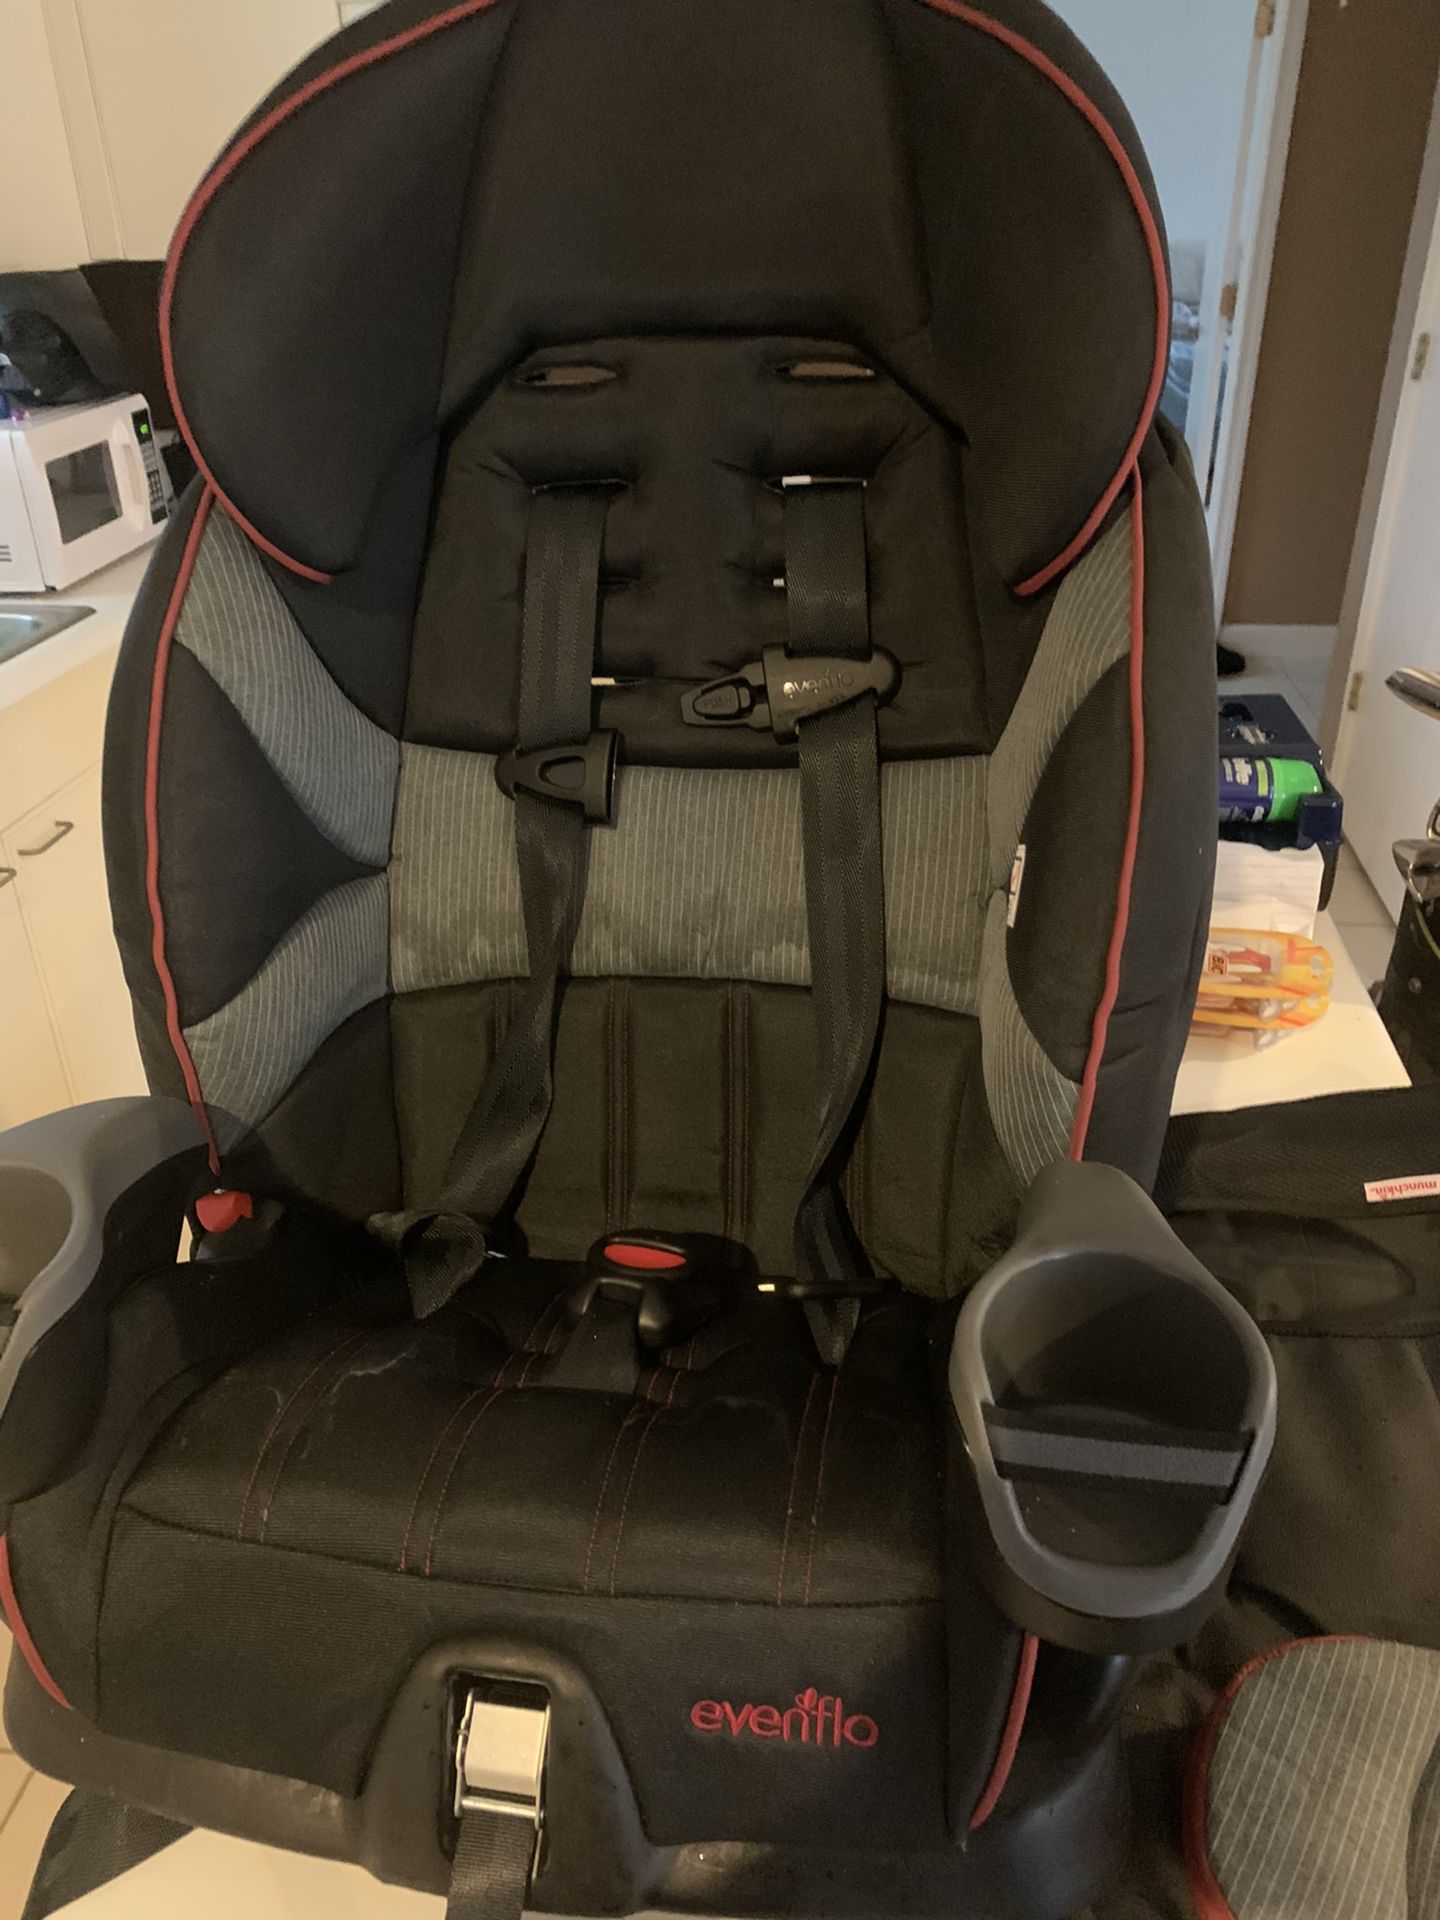 Evenflo car seat black with red trim